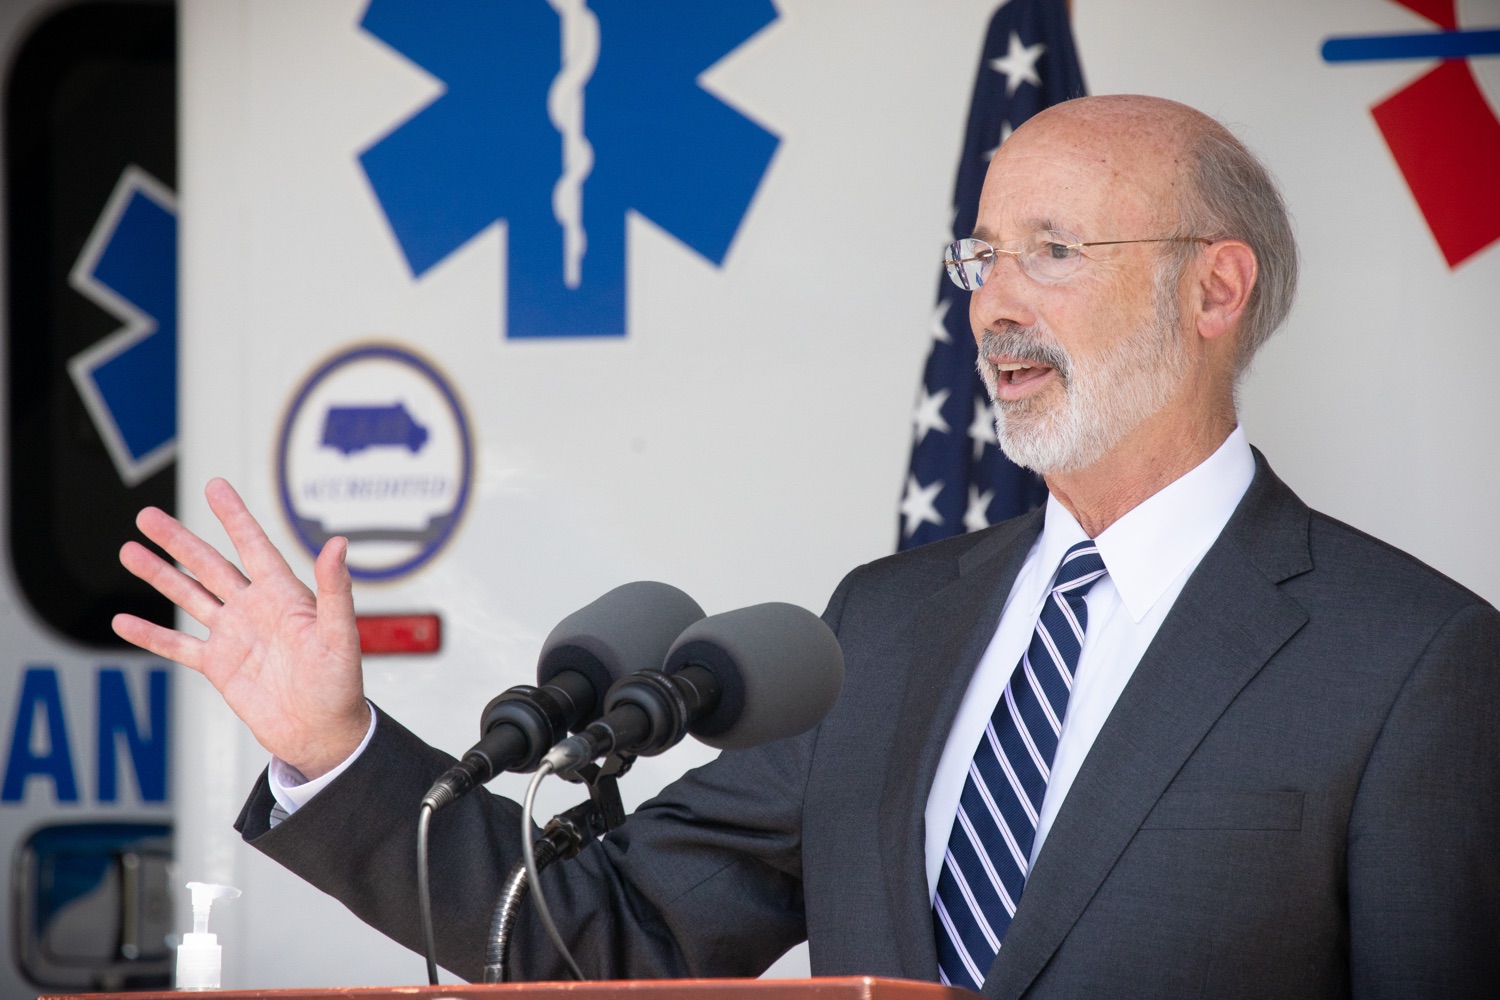 Pennsylvania Governor Tom Wolf speaking to the press. Governor Tom Wolf visited the Millersville location of Lancaster EMS today to thank first responders and learn about how they are adapting their critical work during the states response to the COVID-19 pandemic.  Millersville, PA  July 30, 2020<br><a href="https://filesource.amperwave.net/commonwealthofpa/photo/18180_gov_first_responders_dz_021.jpg" target="_blank">⇣ Download Photo</a>